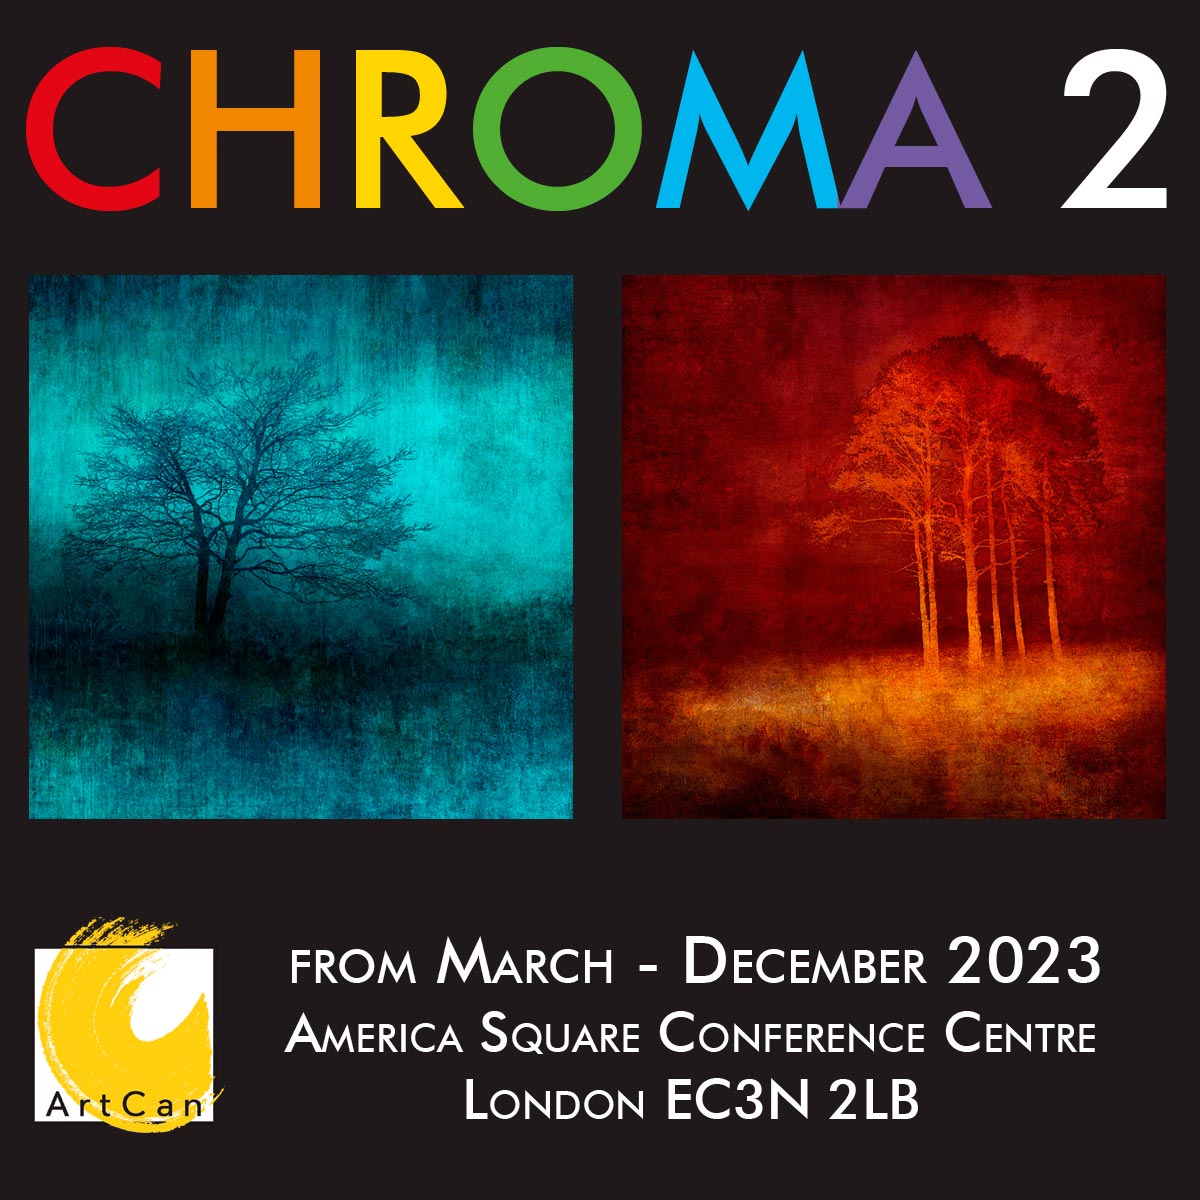 NEW EXHIBITION
Two of my pictures are part of “Chroma 2”, an exhibition curated by Ernesto Romano and staged by @artcanorg . 
ArtCan is an organisation which supports emerging artists by providing opportunities, collaborations and peer support to help their practice
#artcan